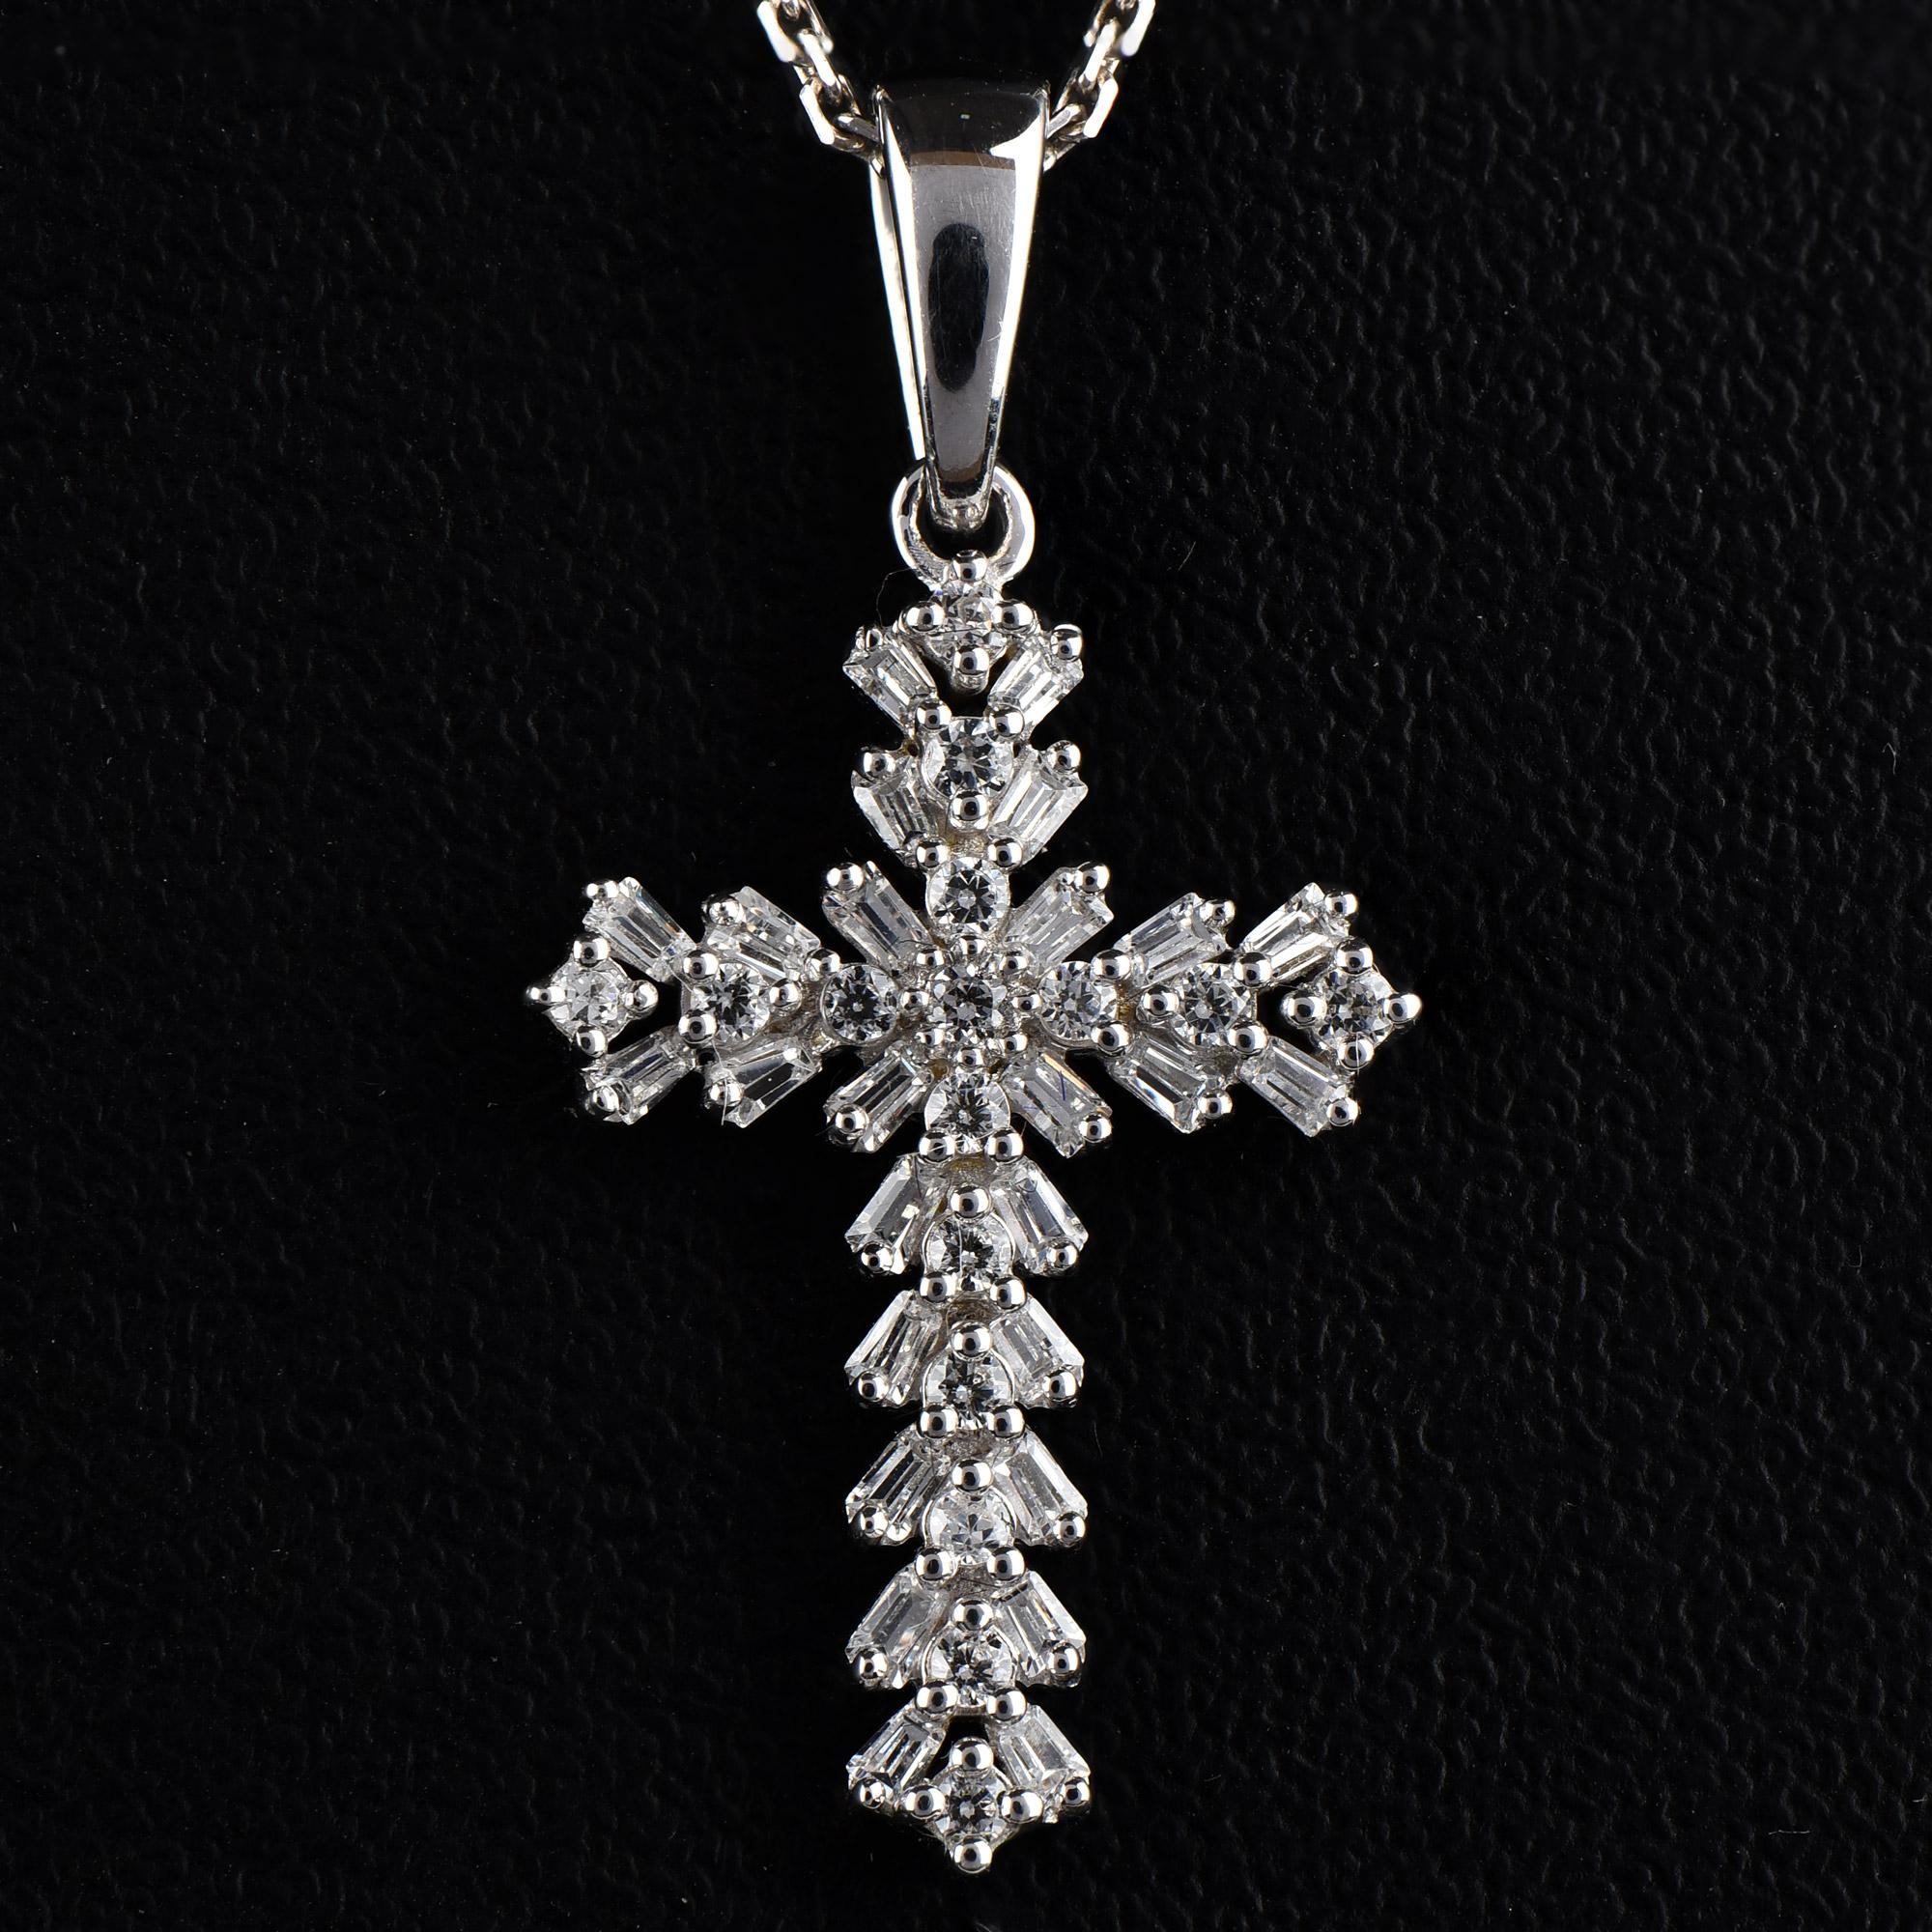 Faith and Fashion combine in this sparkling diamond cross pendant. The pendant is crafted from 14 karat gold in your choice of white, rose, or yellow, and features Round-16 and 26 baguette cut diamond set in Prong setting. The total diamond weight